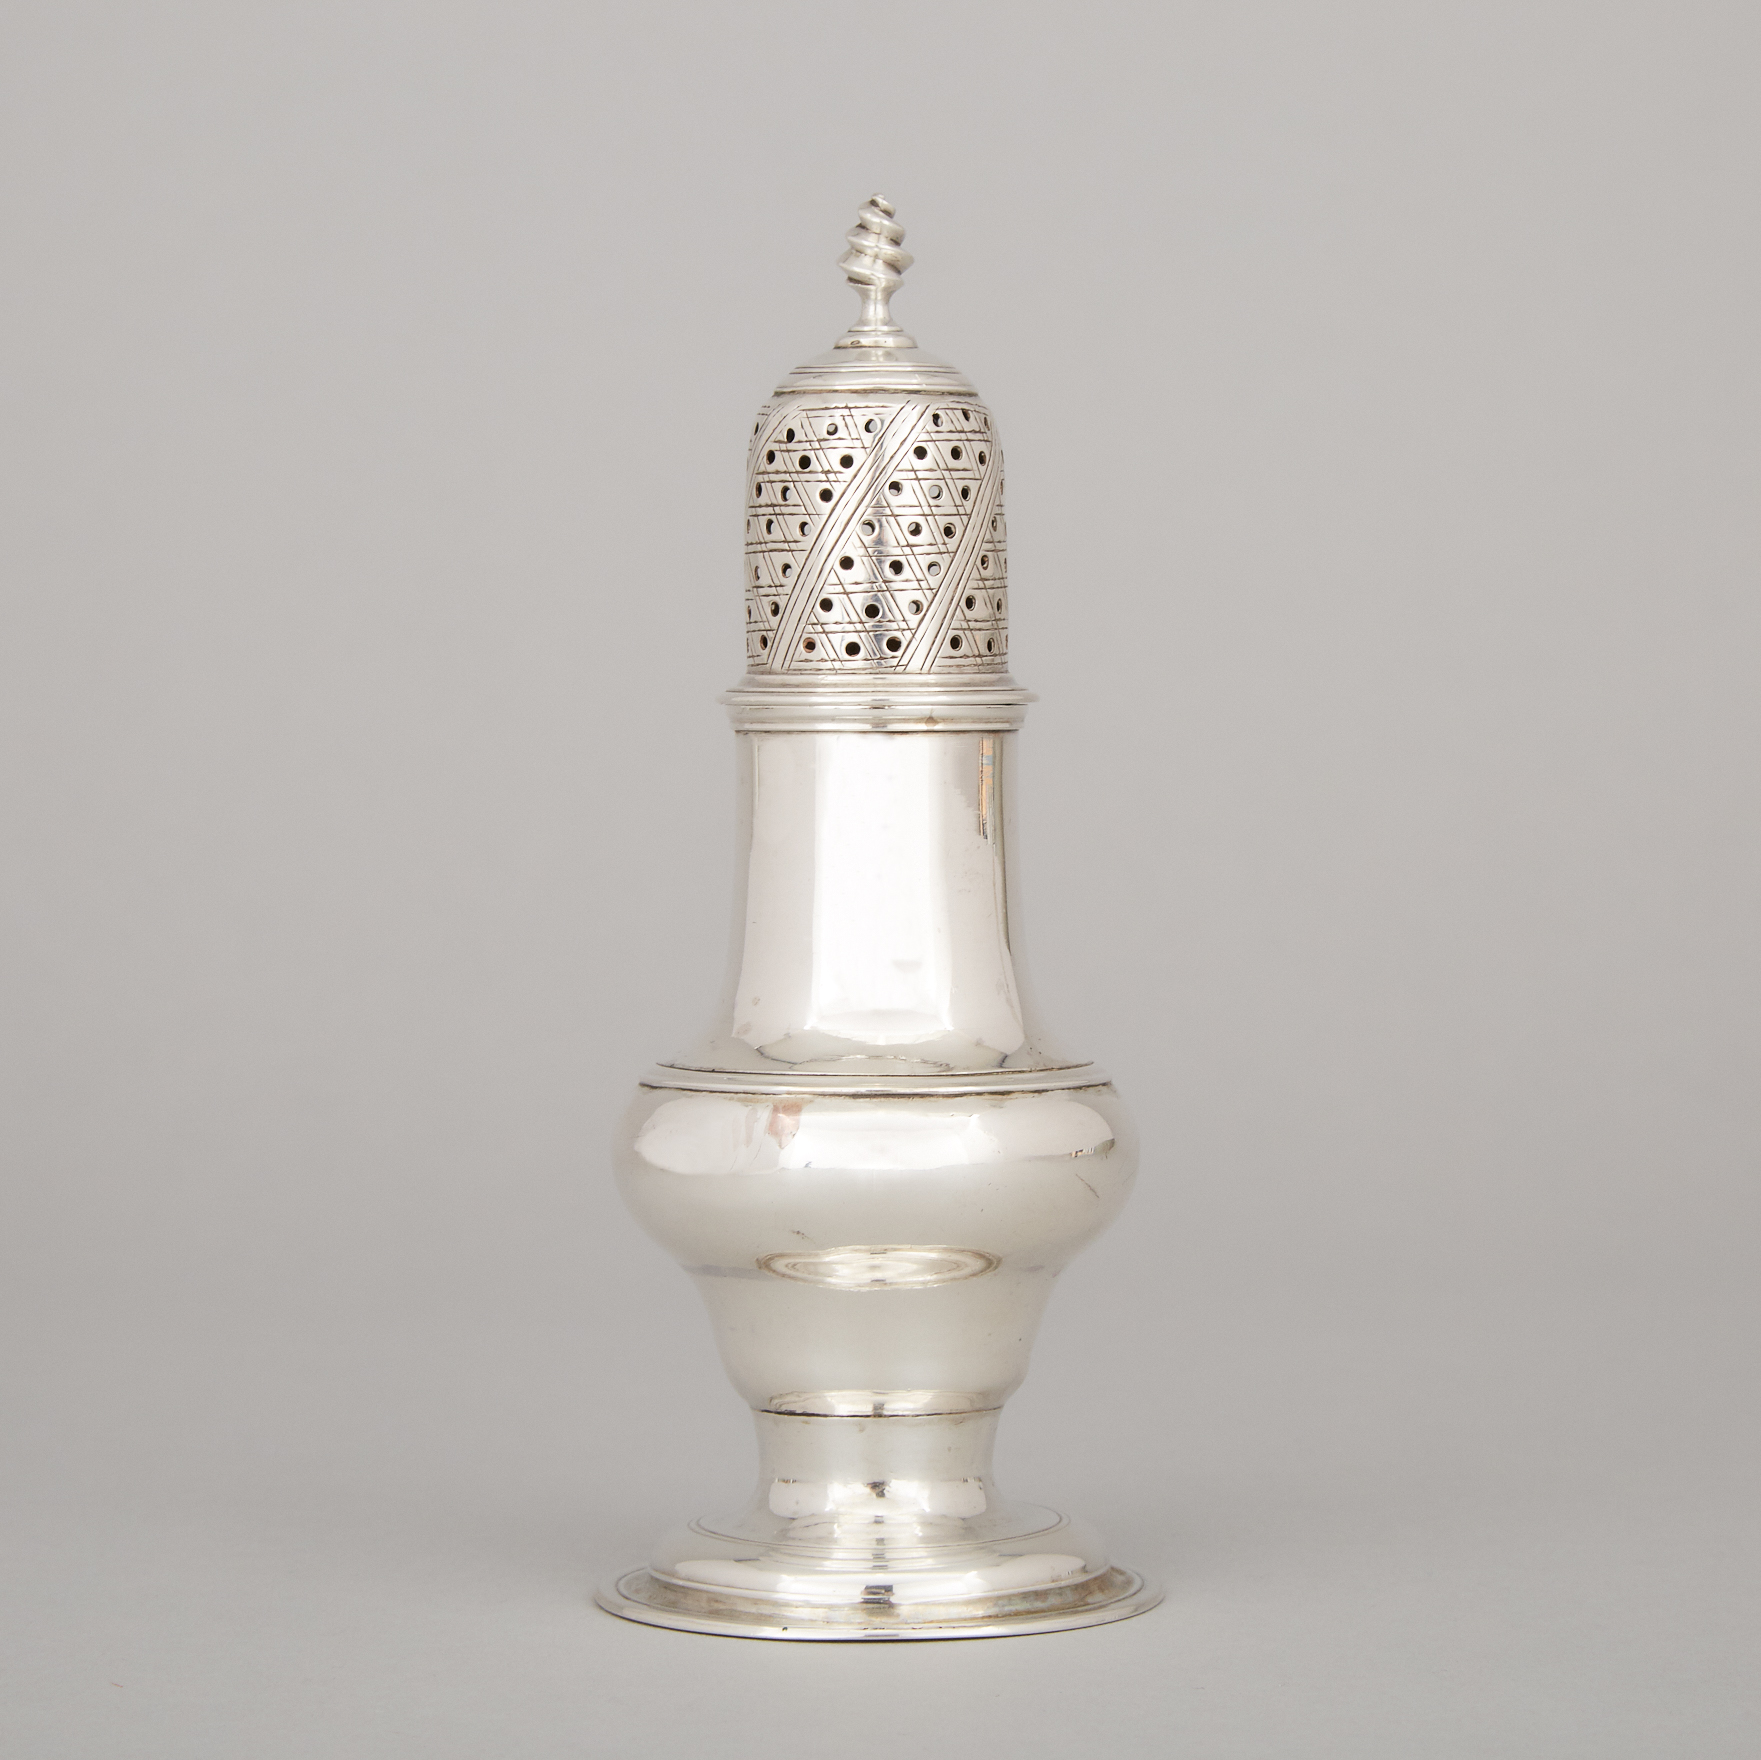 George III Silver Baluster Caster, Thomas Daniell, London, 1774